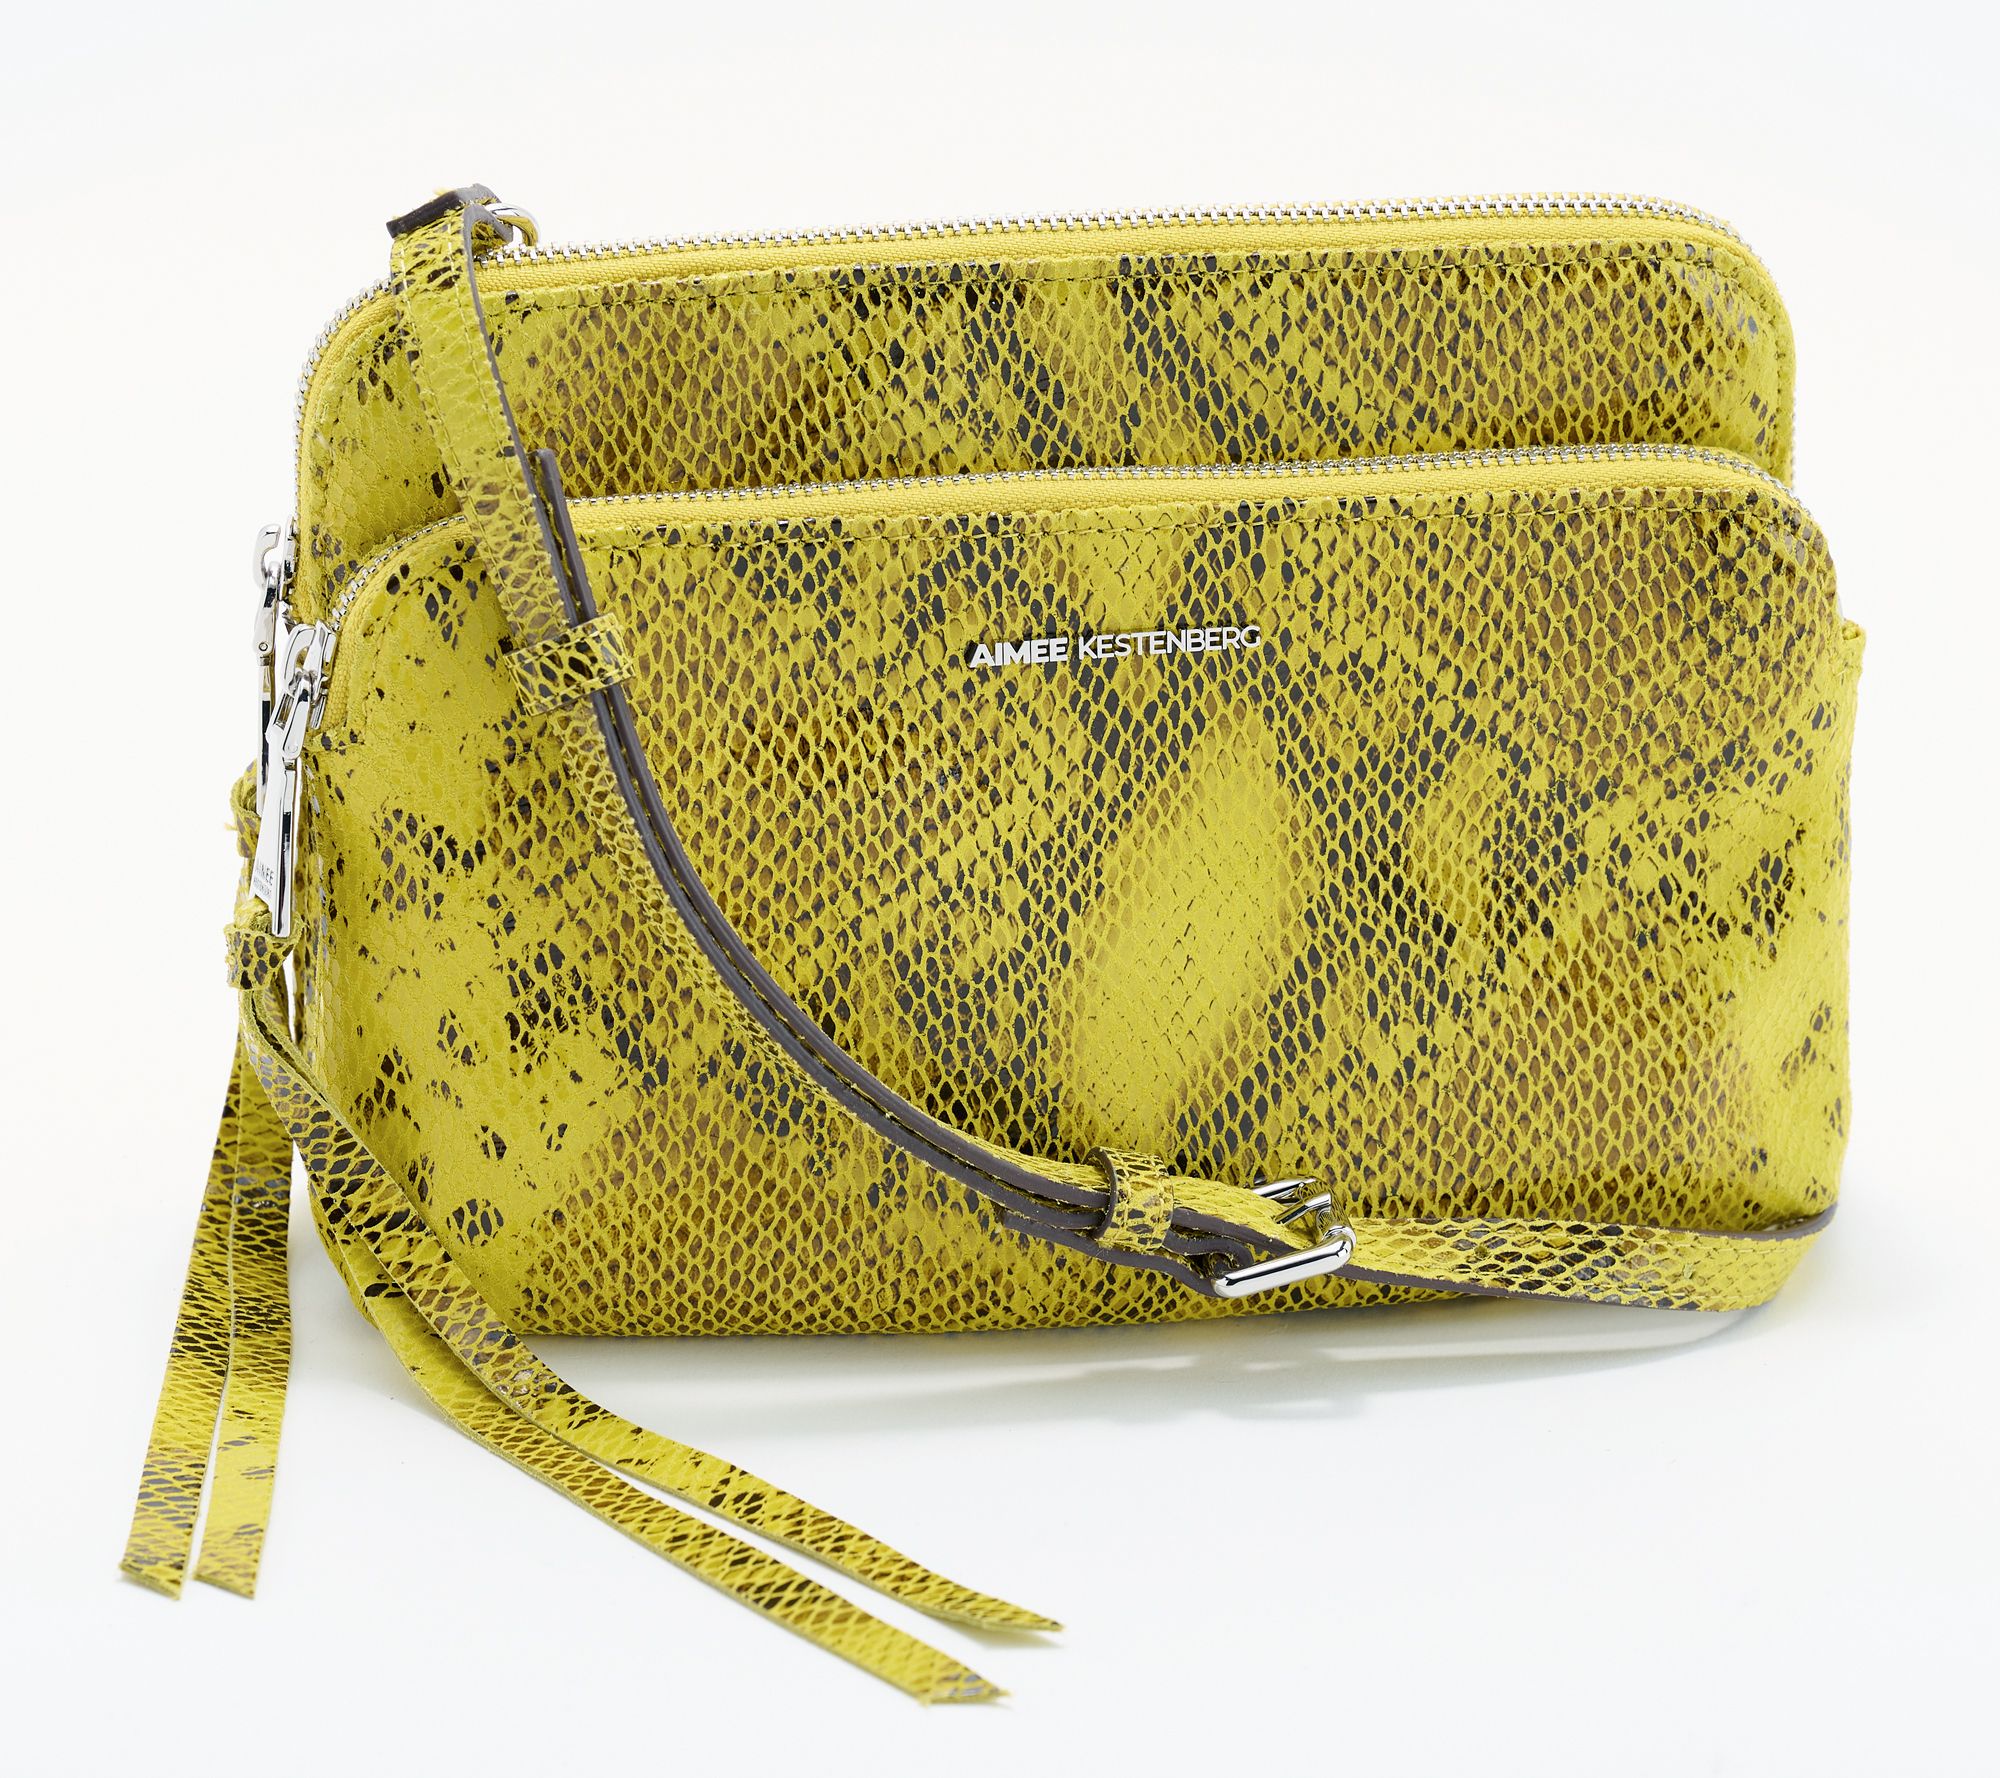 Snakeskin Bags for Women - Up to 75% off